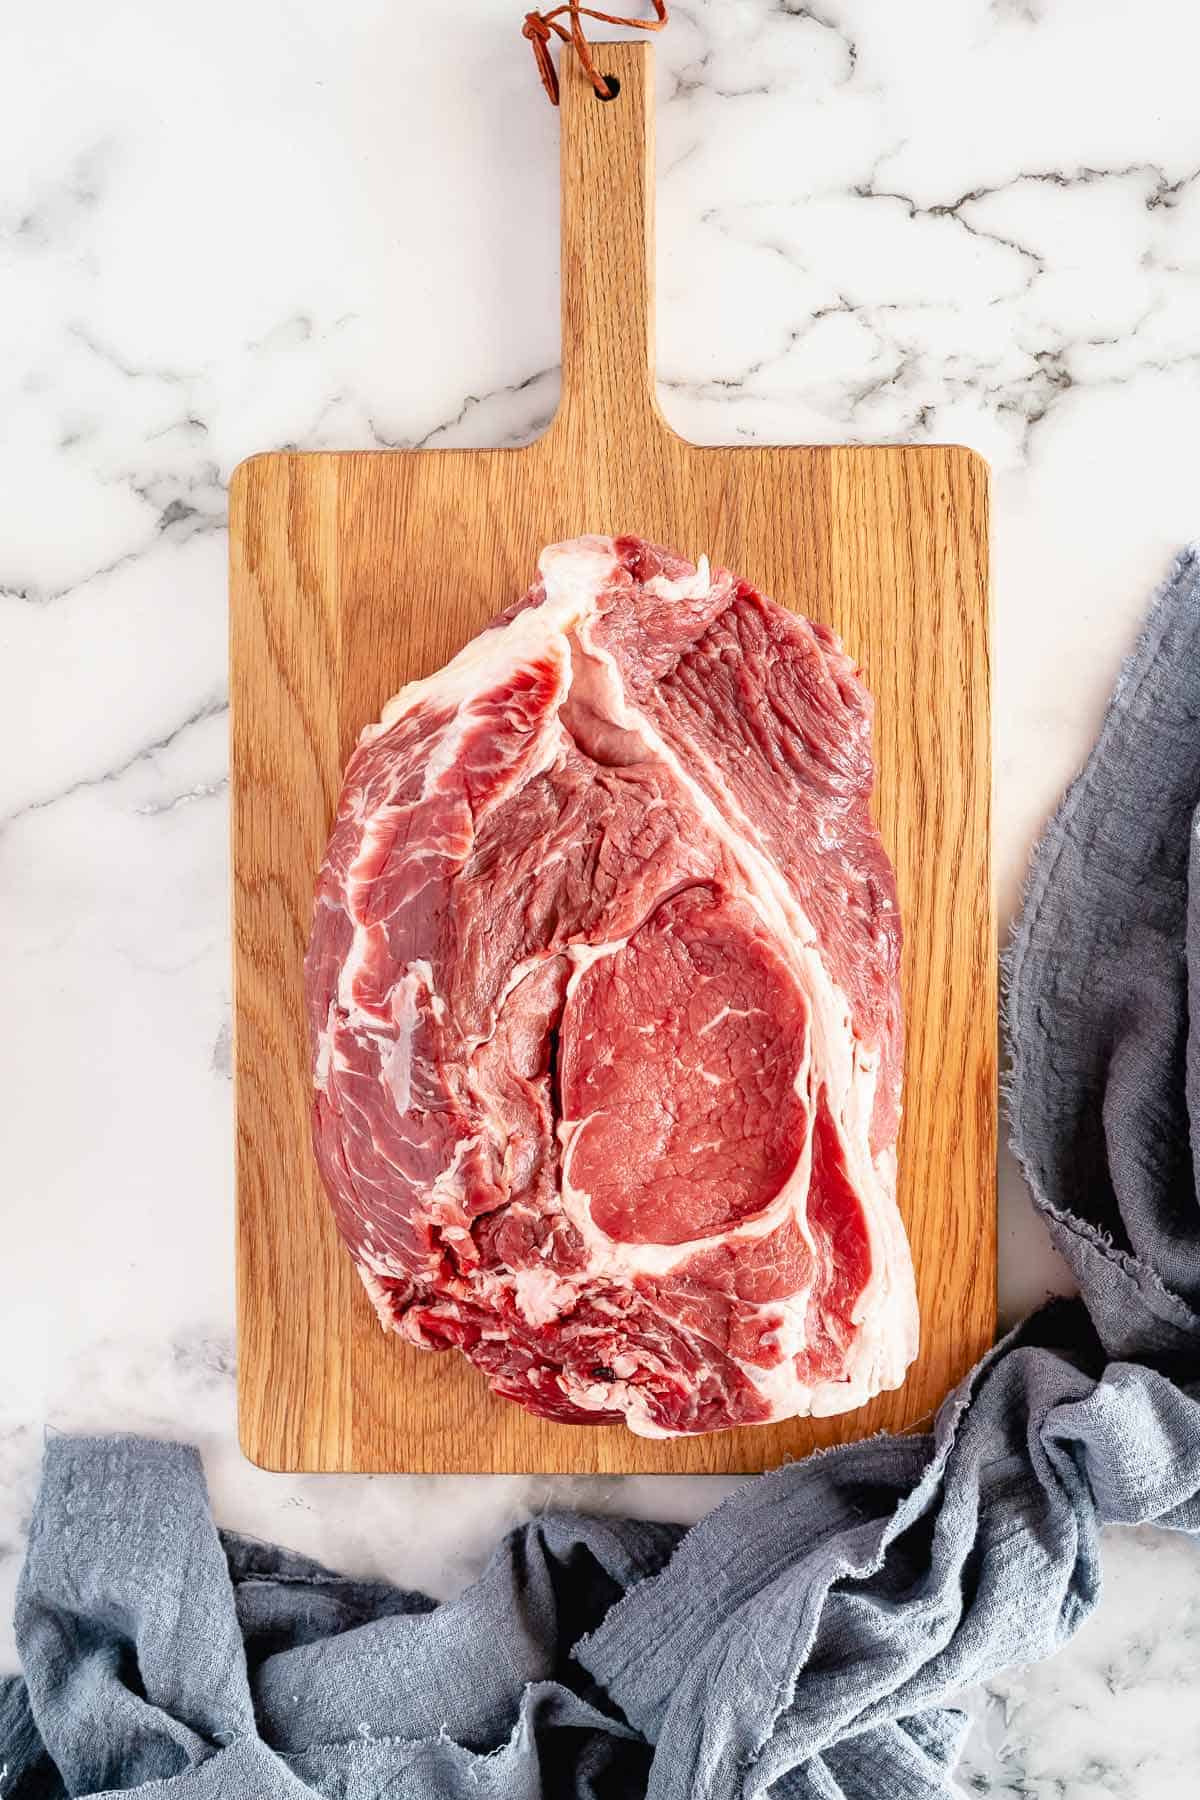 chuck roast on a wooden board white marble background